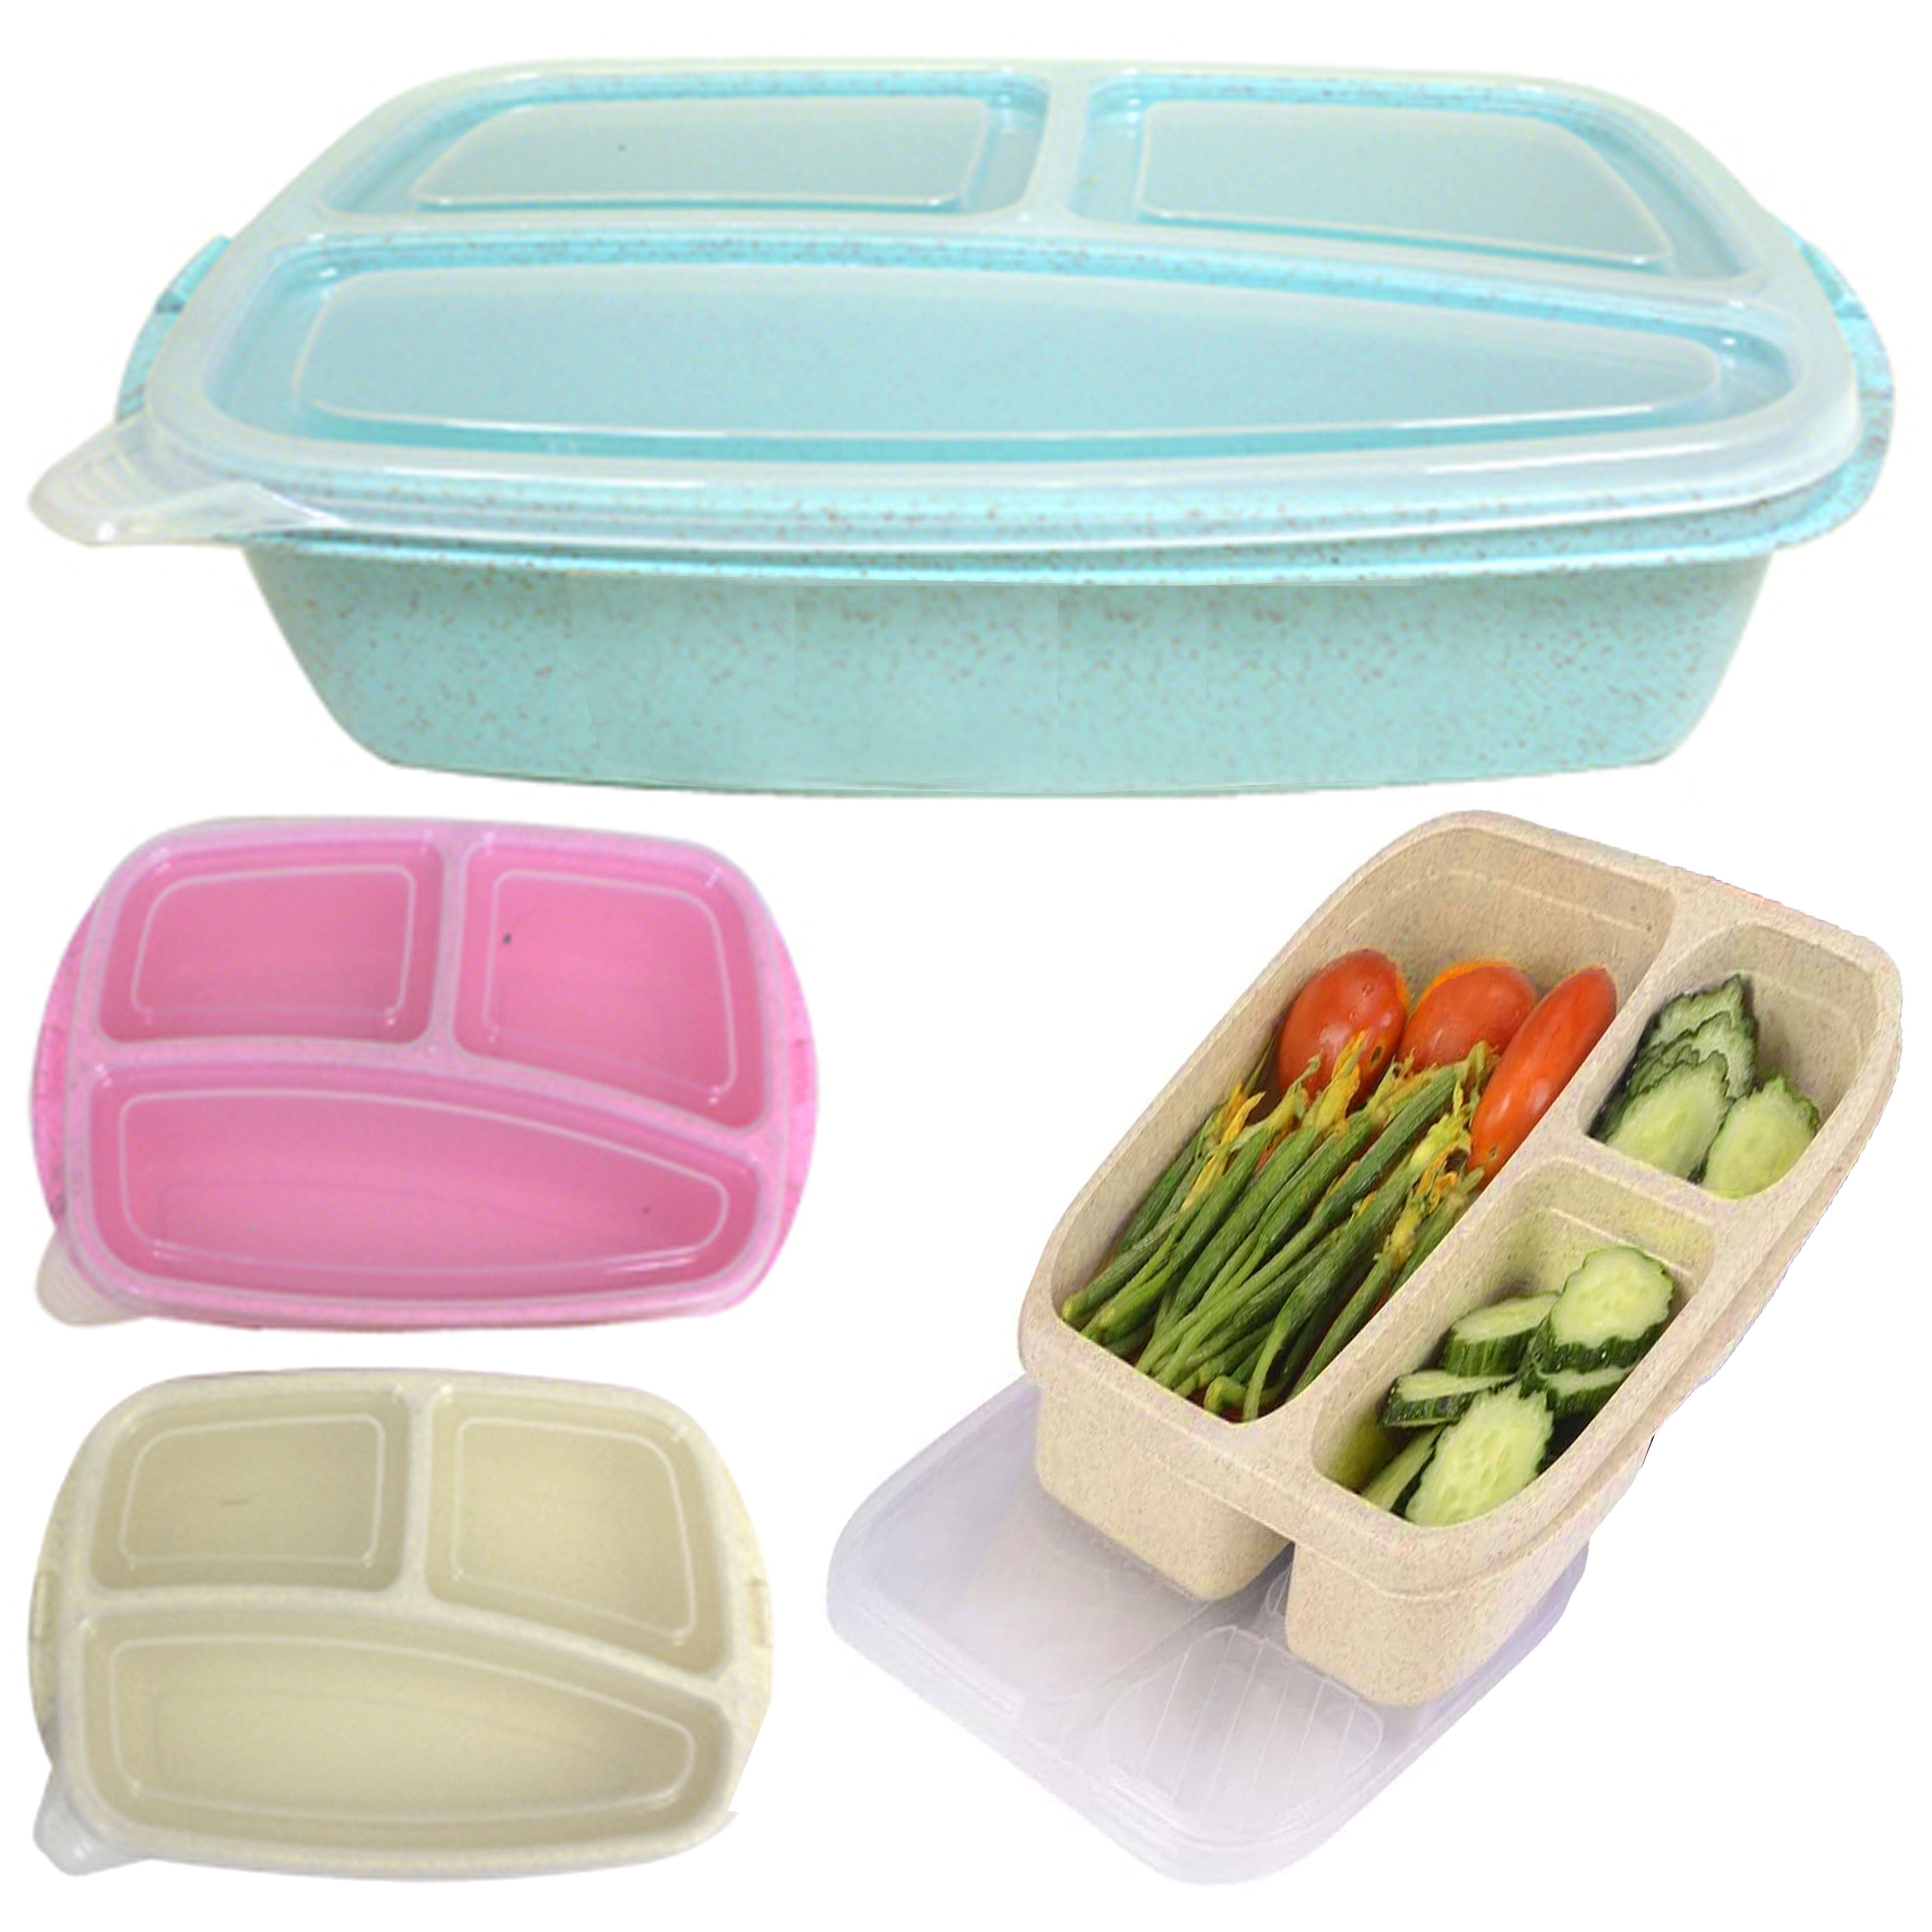 3 Large Food Storage Containers Heavy Duty 3 Section Divided Plate Lids ...